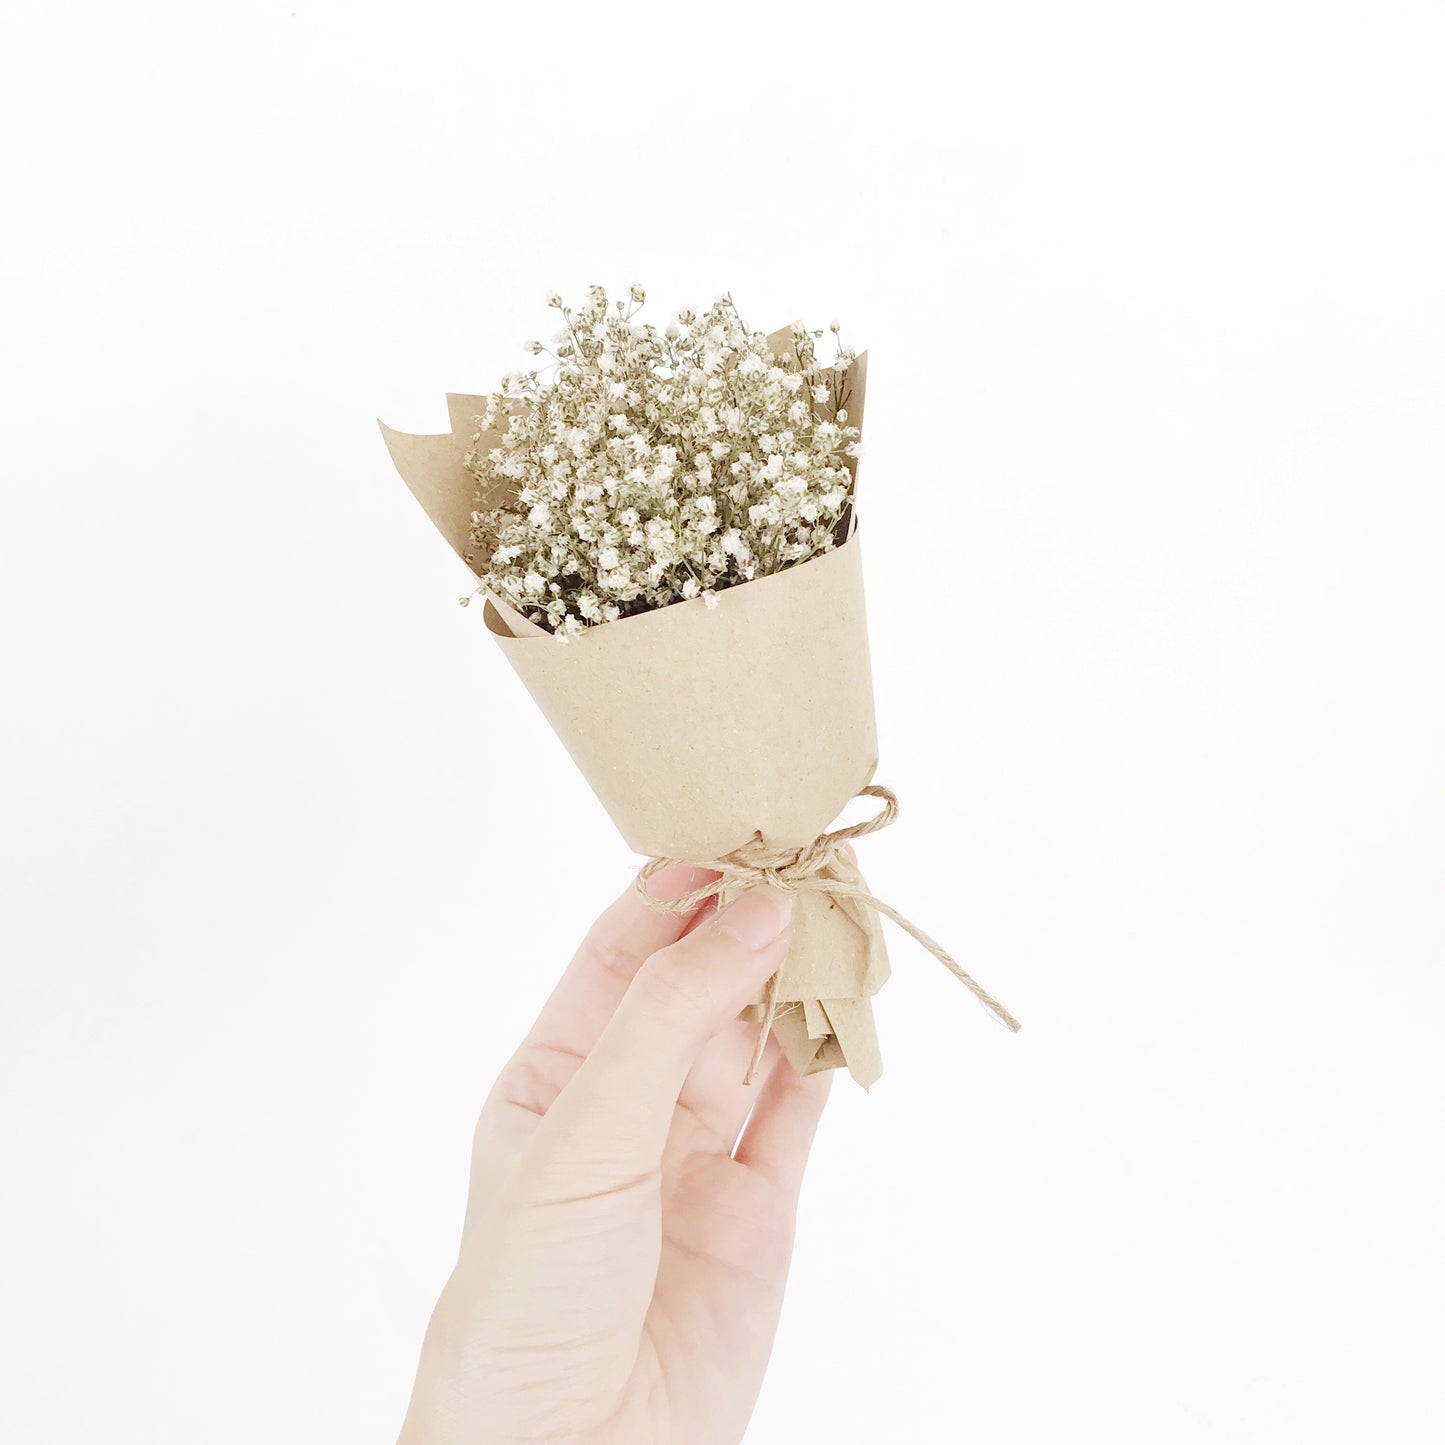 Dried Mini Blooms (Baby’s Breath)